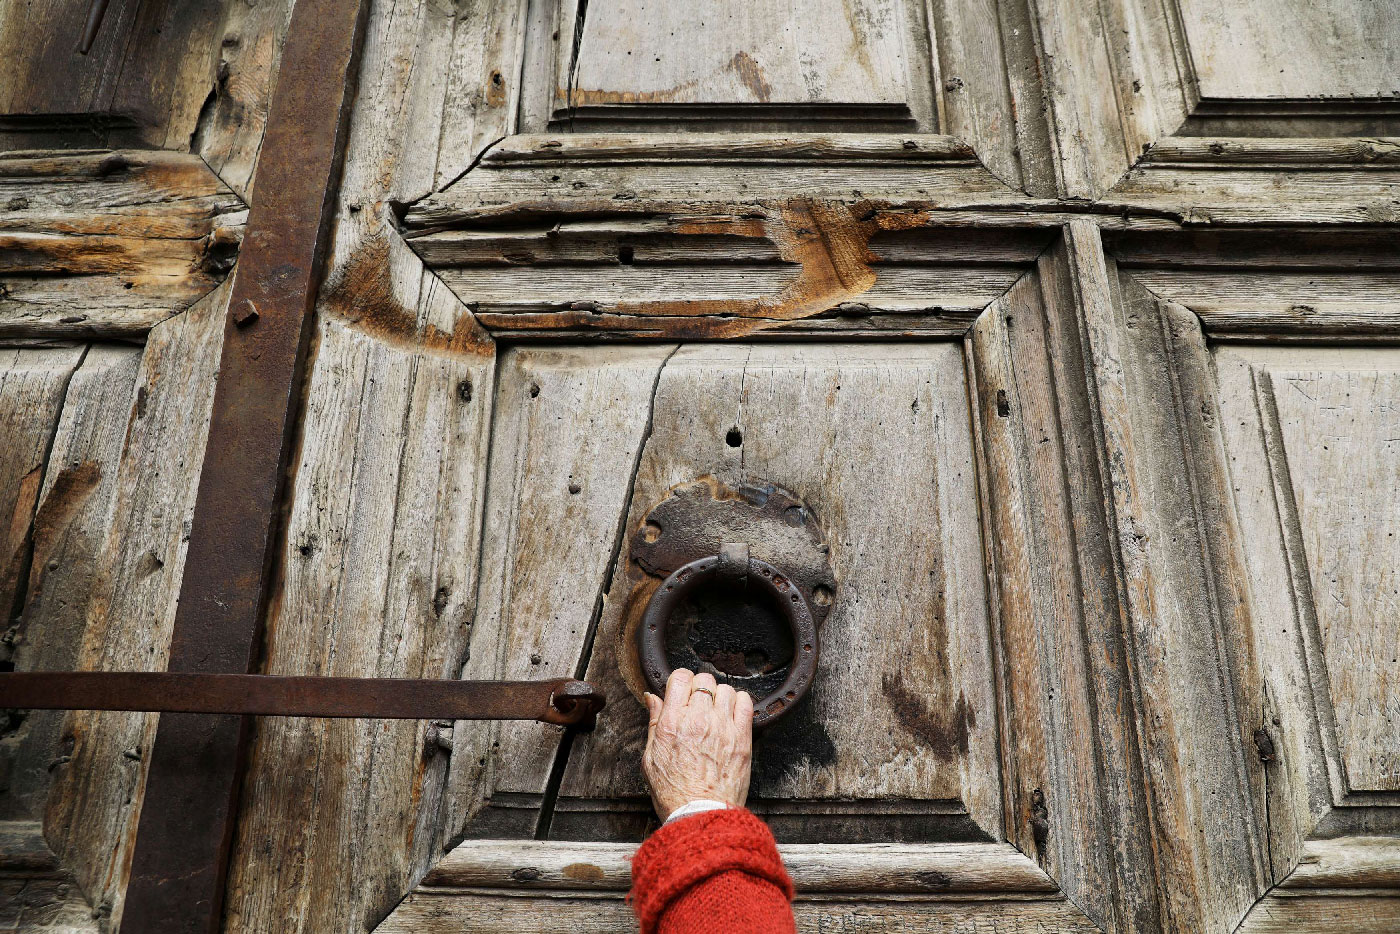 A worshipper touches the closed doors of the Church of the Holy Sepulchre.